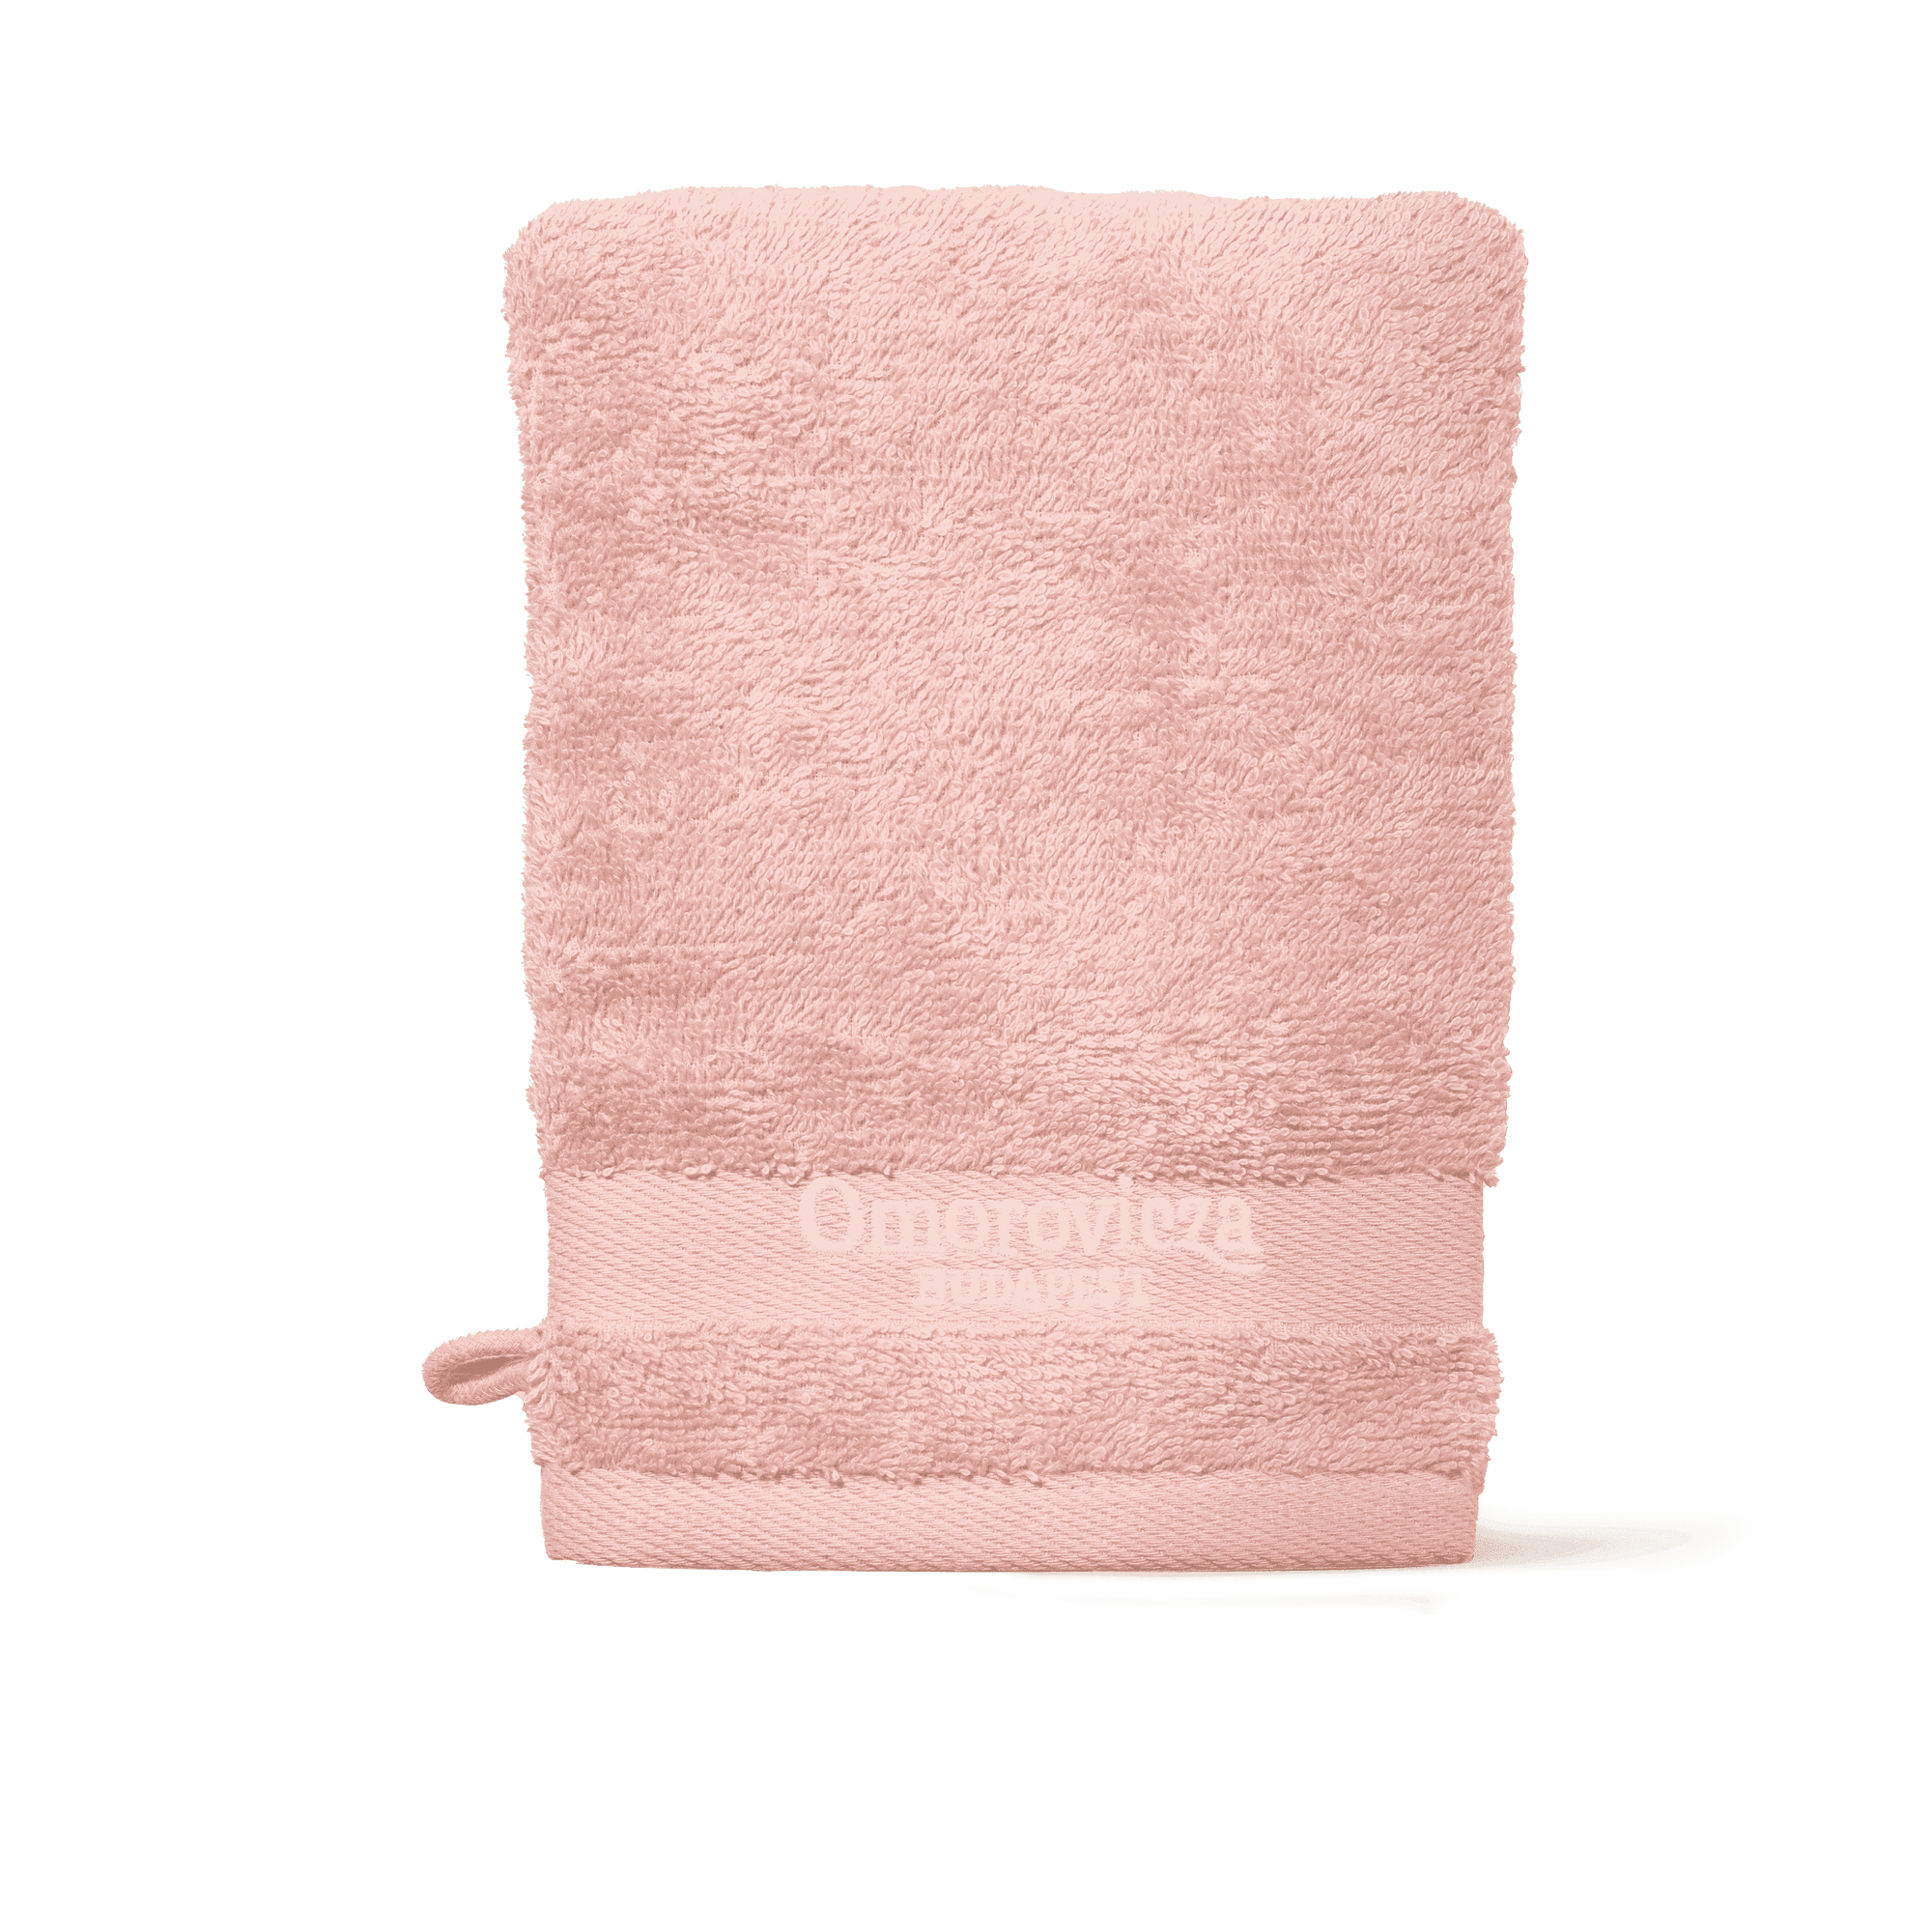 Cleansing Mitt in pink colour with Omorovicza logo.